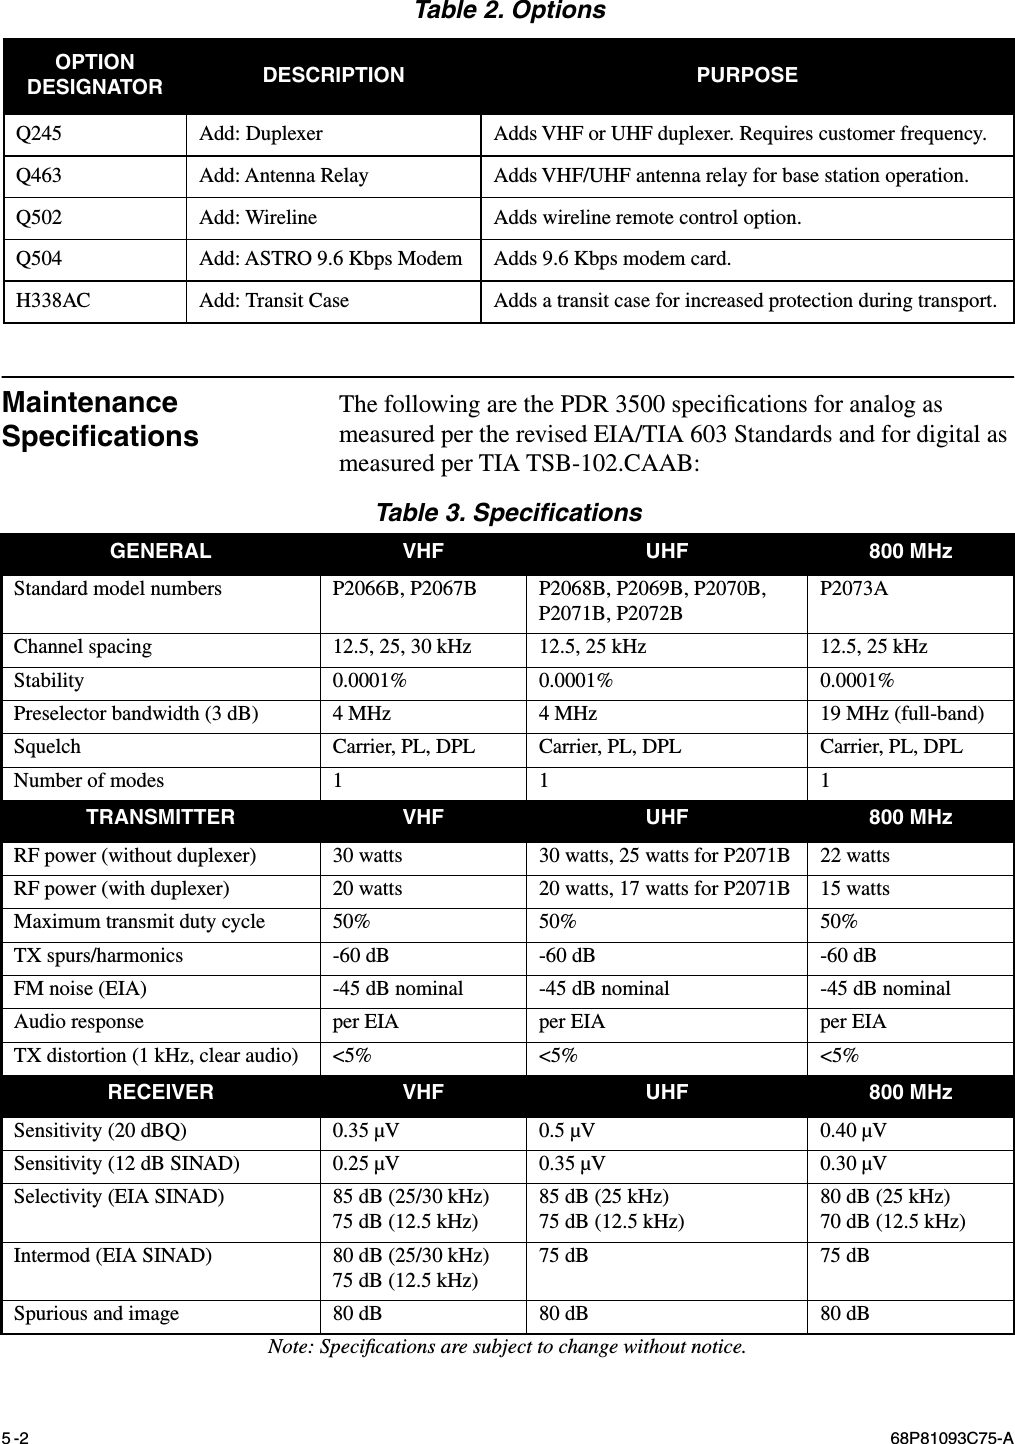  5-2 68P81093C75-A Maintenance Speciﬁcations The following are the PDR 3500 speciﬁcations for analog as measured per the revised EIA/TIA 603 Standards and for digital as measured per TIA TSB-102.CAAB: Table 2. Options OPTION DESIGNATOR DESCRIPTION PURPOSE Q245 Add: Duplexer Adds VHF or UHF duplexer. Requires customer frequency.Q463 Add: Antenna Relay Adds VHF/UHF antenna relay for base station operation.Q502 Add: Wireline Adds wireline remote control option.Q504 Add: ASTRO 9.6 Kbps Modem Adds 9.6 Kbps modem card.H338AC Add: Transit Case Adds a transit case for increased protection during transport. Table 3. Speciﬁcations GENERAL VHF UHF 800 MHz Standard model numbers P2066B, P2067B P2068B, P2069B, P2070B, P2071B, P2072BP2073AChannel spacing 12.5, 25, 30 kHz 12.5, 25 kHz 12.5, 25 kHzStability 0.0001% 0.0001% 0.0001%Preselector bandwidth (3 dB) 4 MHz 4 MHz 19 MHz (full-band)Squelch Carrier, PL, DPL Carrier, PL, DPL Carrier, PL, DPLNumber of modes 1 1 1 TRANSMITTER VHF UHF 800 MHz RF power (without duplexer) 30 watts 30 watts, 25 watts for P2071B 22 wattsRF power (with duplexer) 20 watts 20 watts, 17 watts for P2071B 15 wattsMaximum transmit duty cycle 50% 50% 50%TX spurs/harmonics -60 dB -60 dB -60 dBFM noise (EIA) -45 dB nominal -45 dB nominal -45 dB nominalAudio response per EIA per EIA per EIATX distortion (1 kHz, clear audio) &lt;5% &lt;5% &lt;5% RECEIVER VHF UHF 800 MHz Sensitivity (20 dBQ) 0.35 µV 0.5 µV 0.40 µVSensitivity (12 dB SINAD) 0.25 µV 0.35 µV 0.30 µVSelectivity (EIA SINAD) 85 dB (25/30 kHz)75 dB (12.5 kHz)85 dB (25 kHz)75 dB (12.5 kHz)80 dB (25 kHz)70 dB (12.5 kHz)Intermod (EIA SINAD) 80 dB (25/30 kHz)75 dB (12.5 kHz)75 dB 75 dBSpurious and image 80 dB 80 dB 80 dB Note: Speciﬁcations are subject to change without notice.